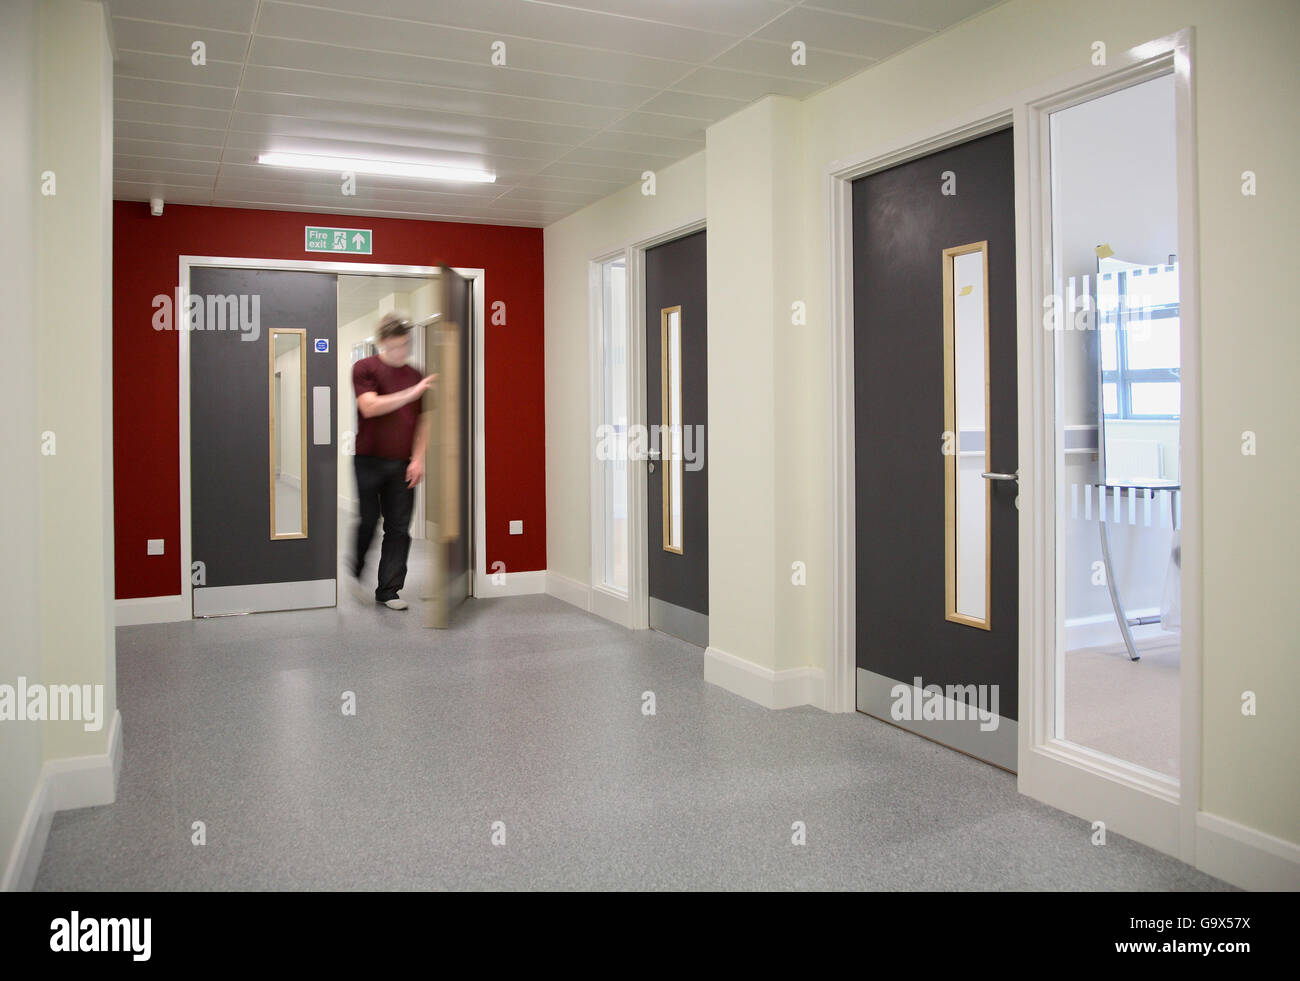 A student passes through a double door at the new Medway Campus building at Mid Kent further education college, Gillingham, Kent Stock Photo